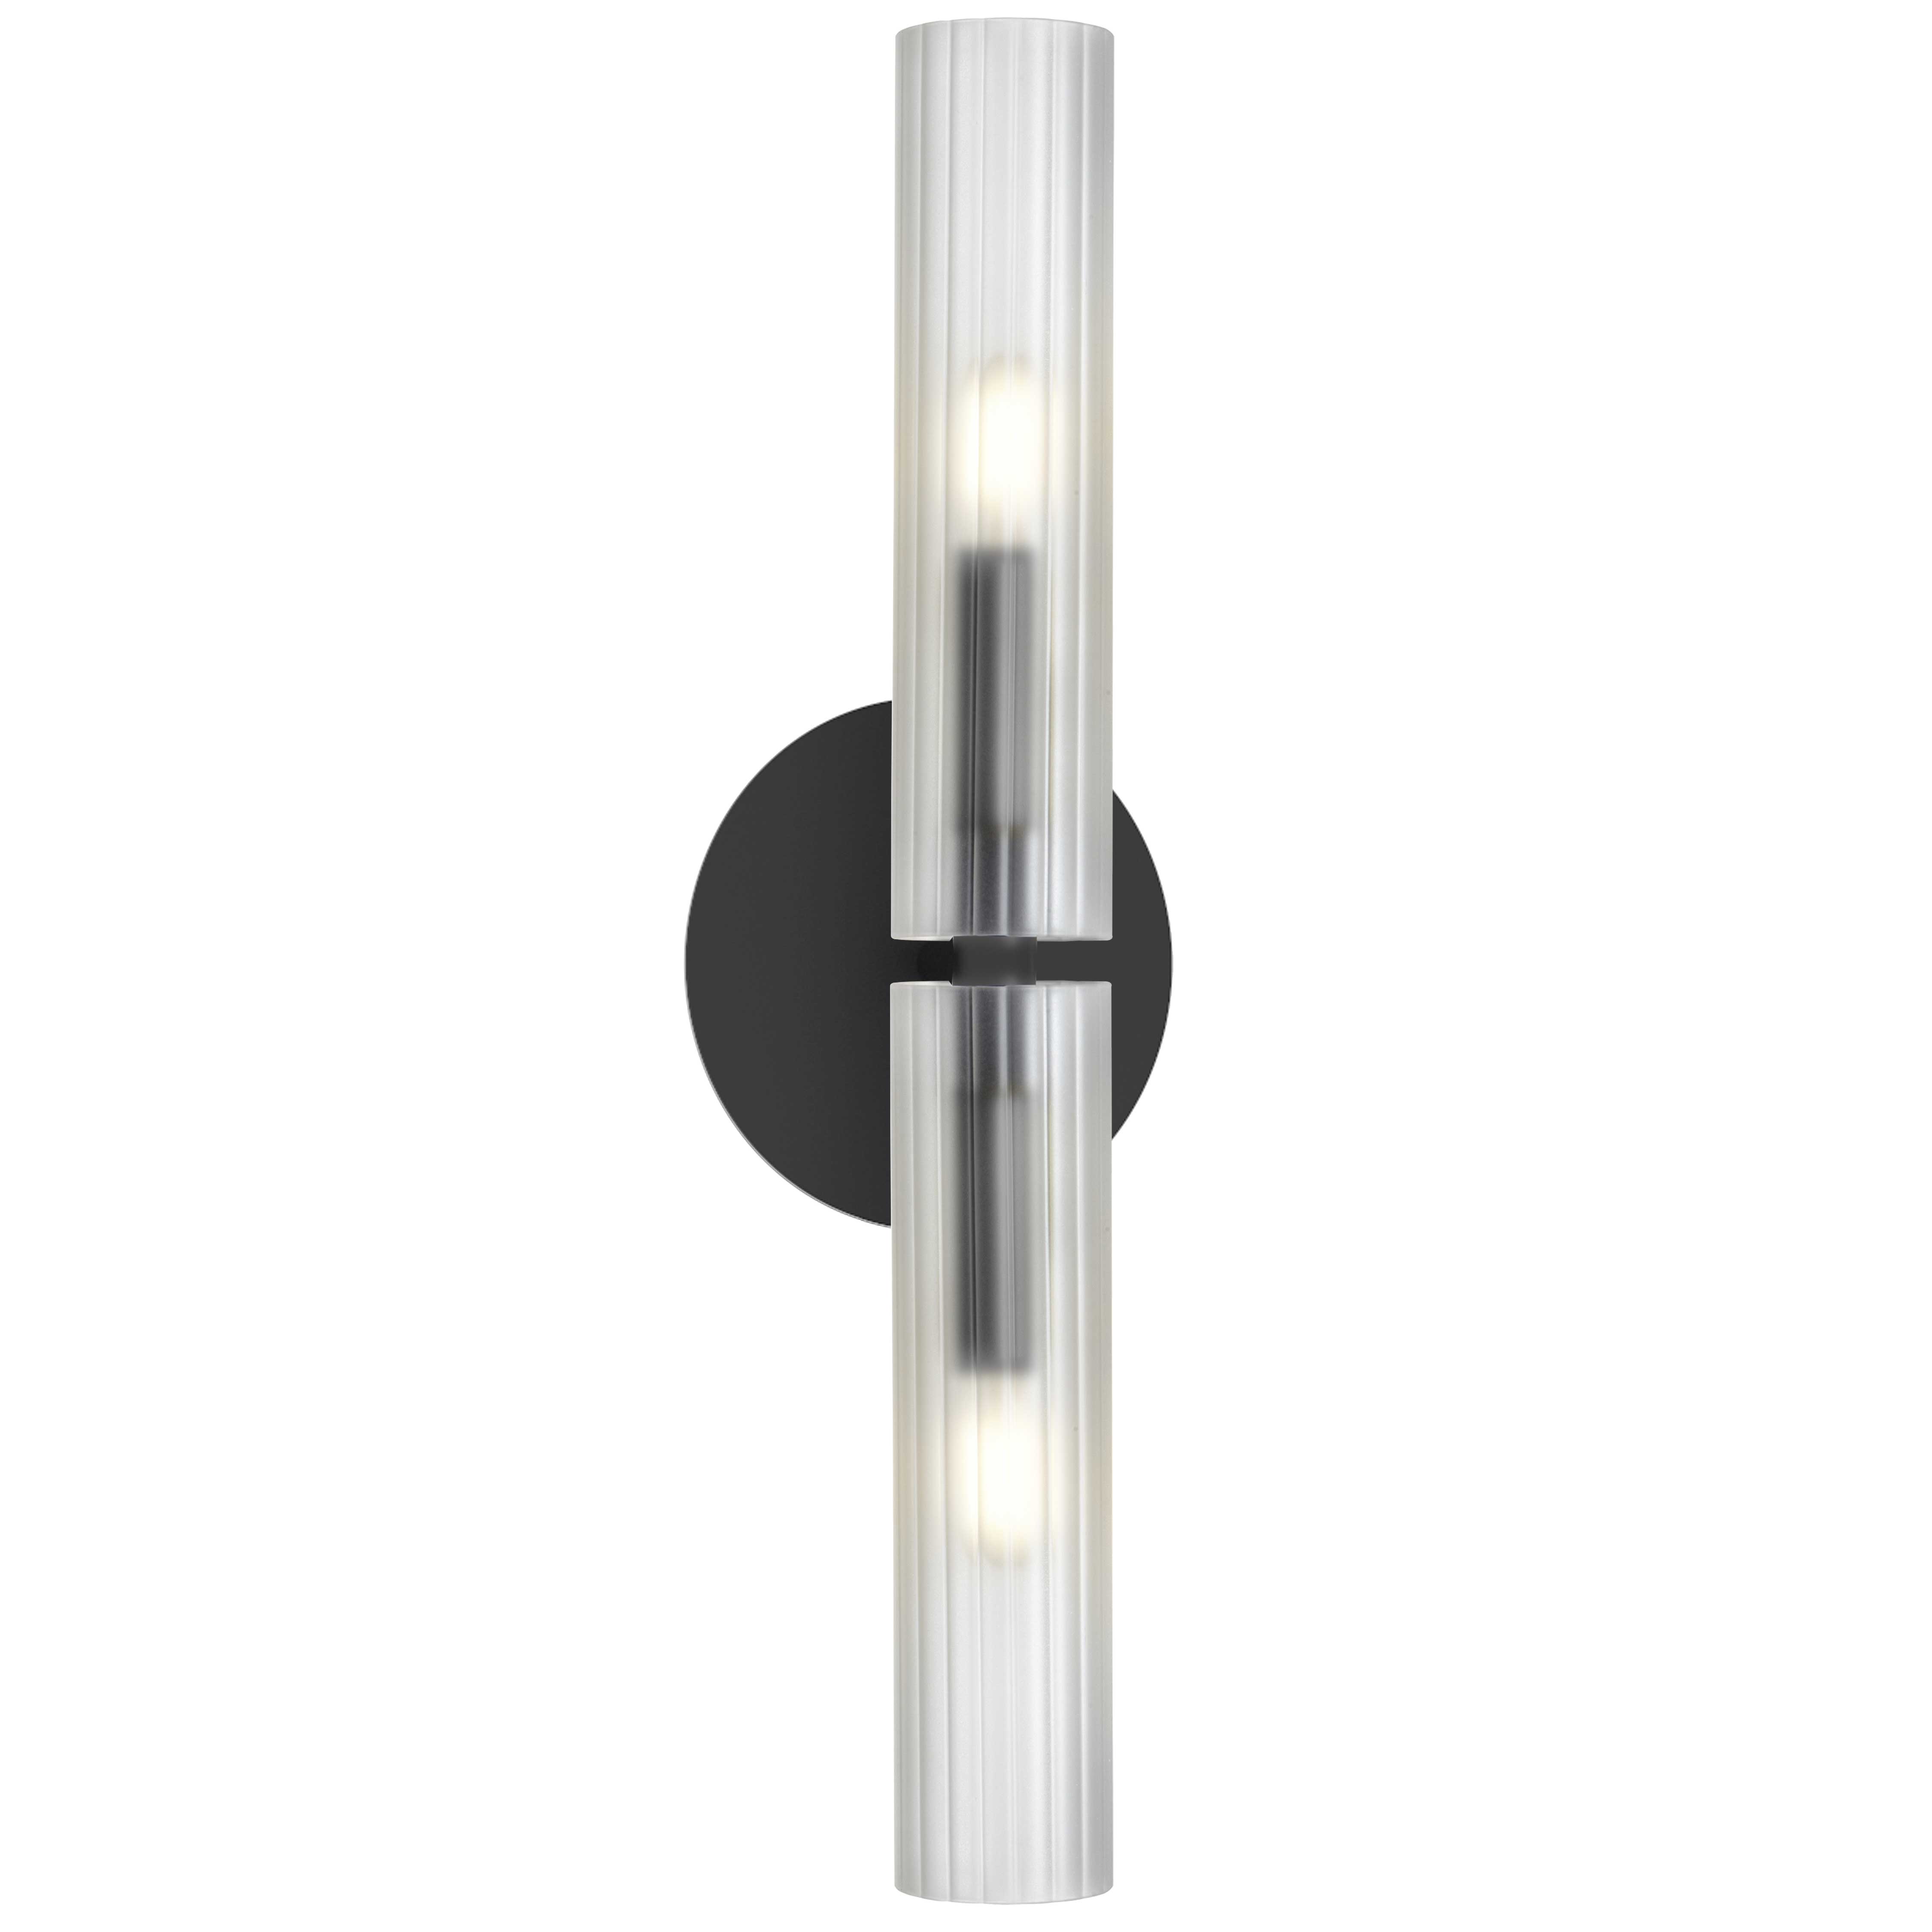 2LT Incandescent Wall Sconce, MB w/ FR Glass